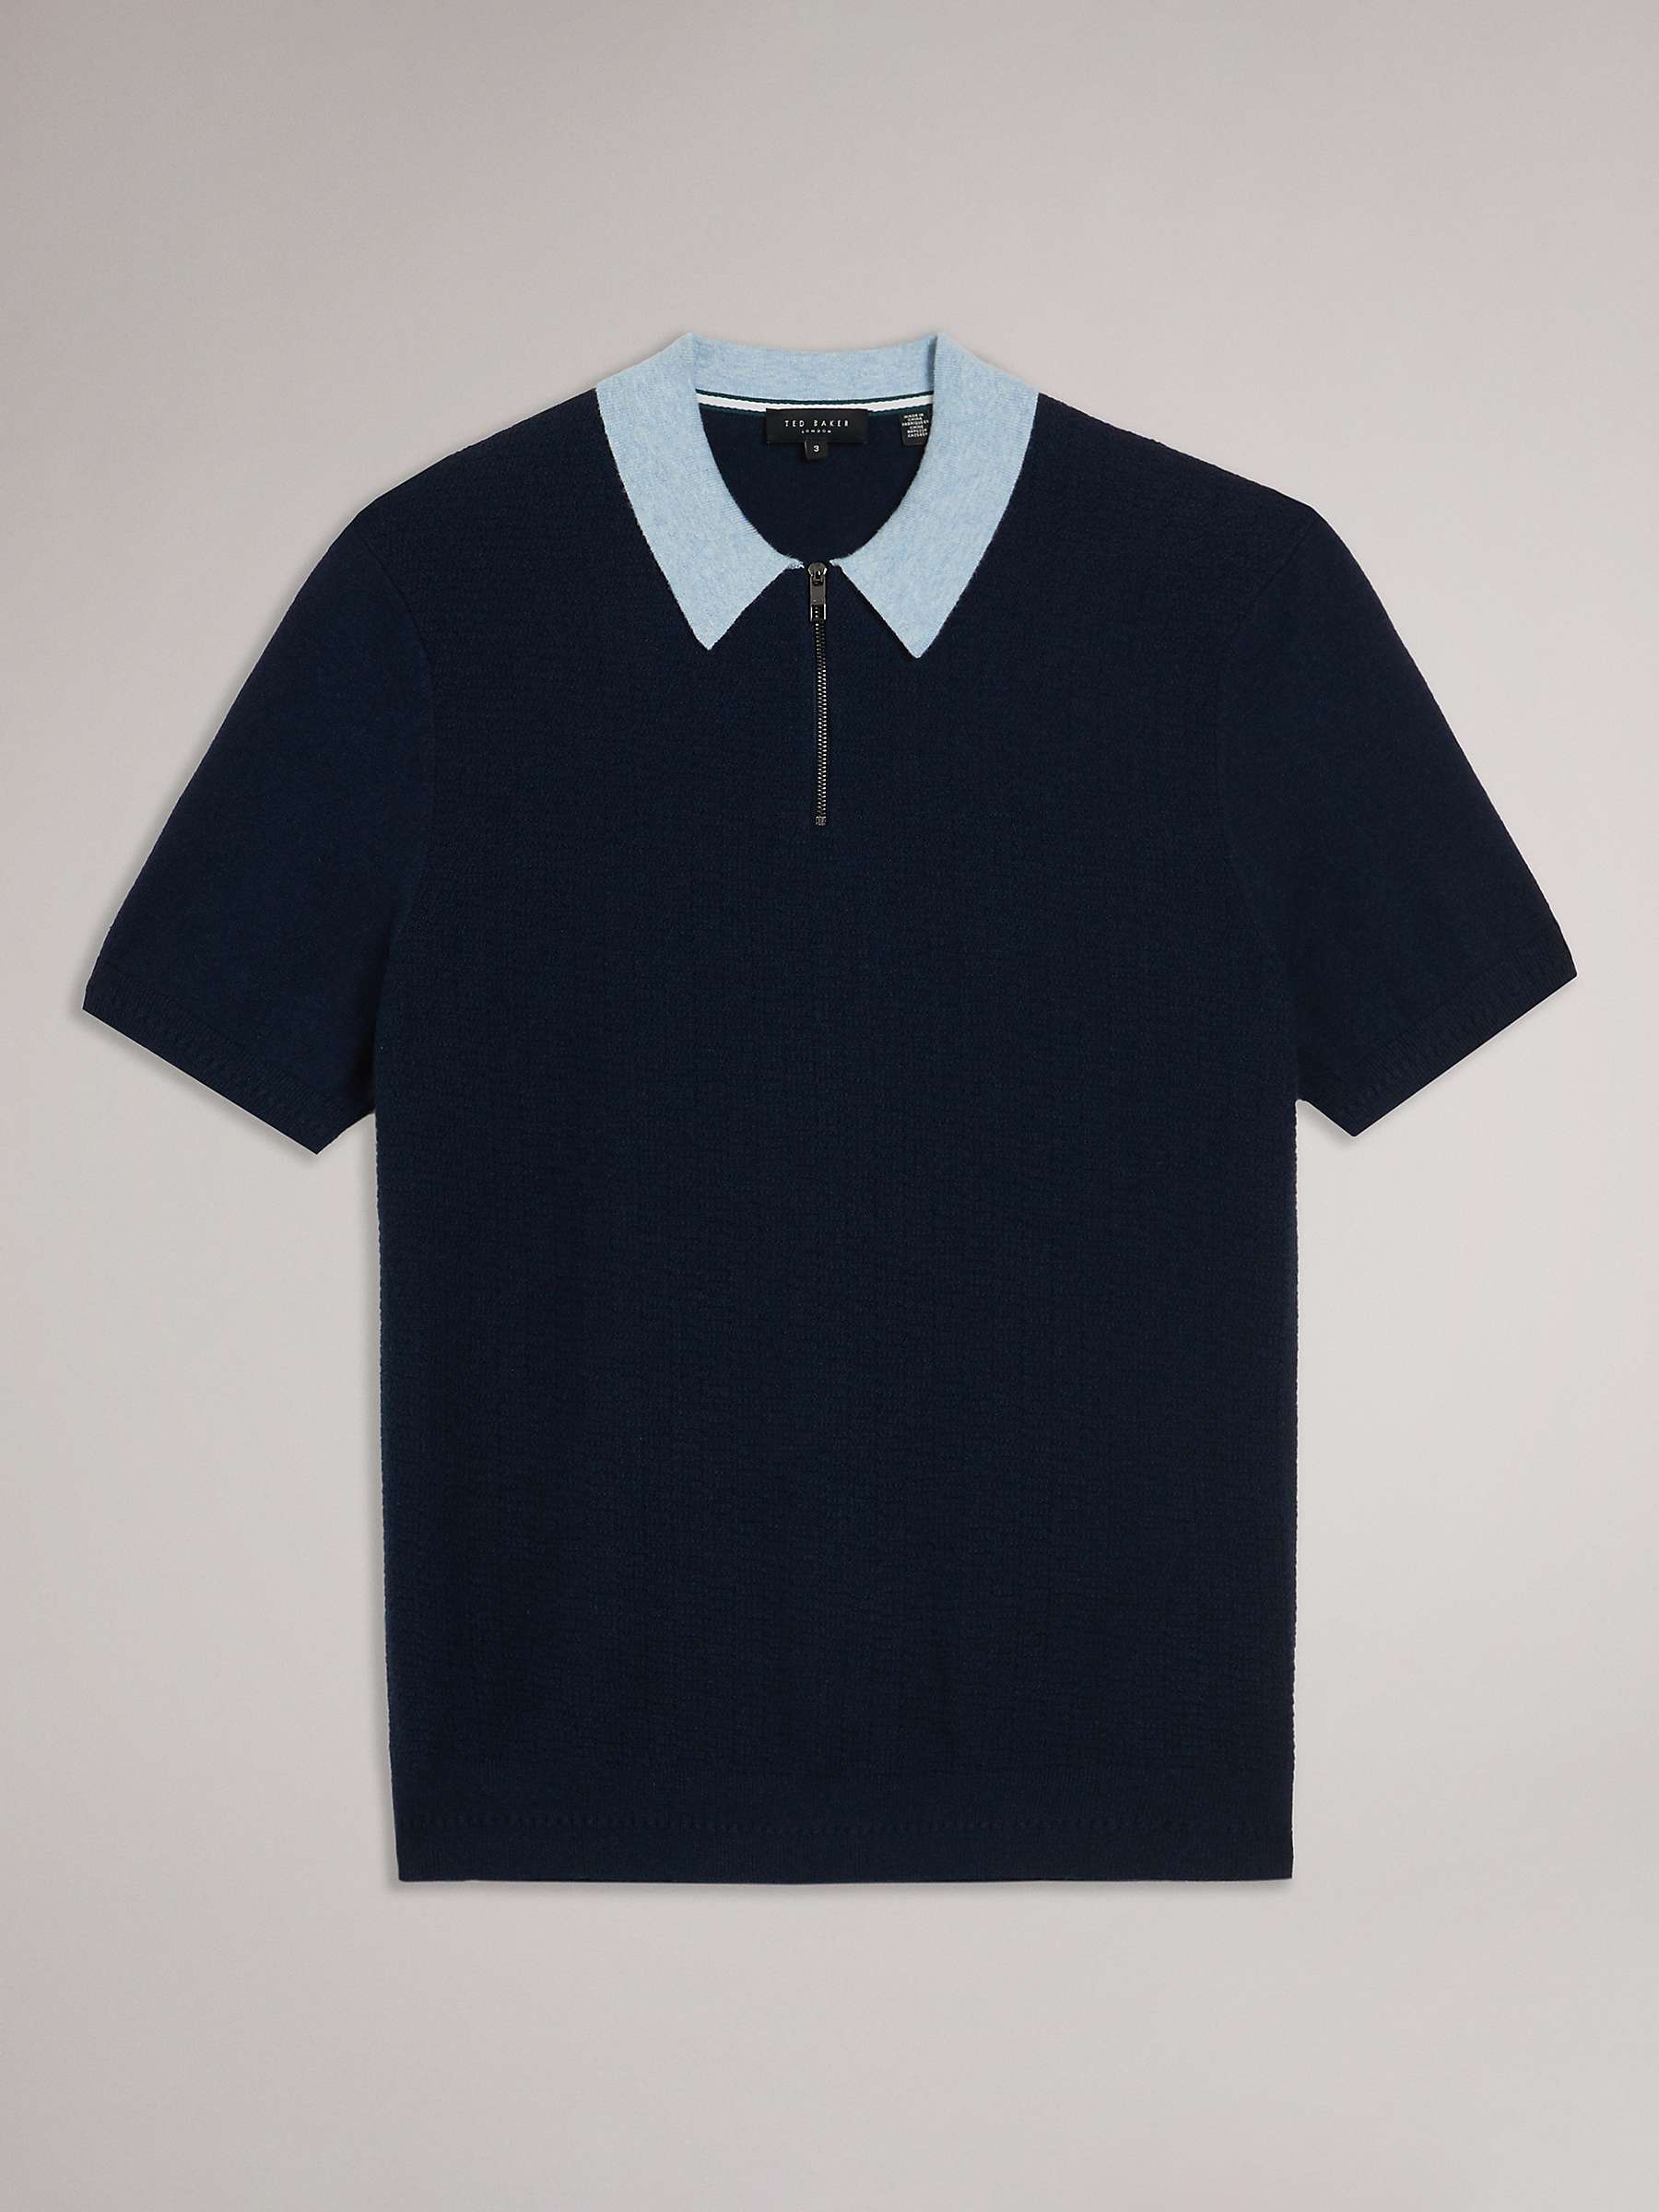 Buy Ted Baker Arwik Wool Blend Contrast Collar Polo Shirt, Navy Online at johnlewis.com